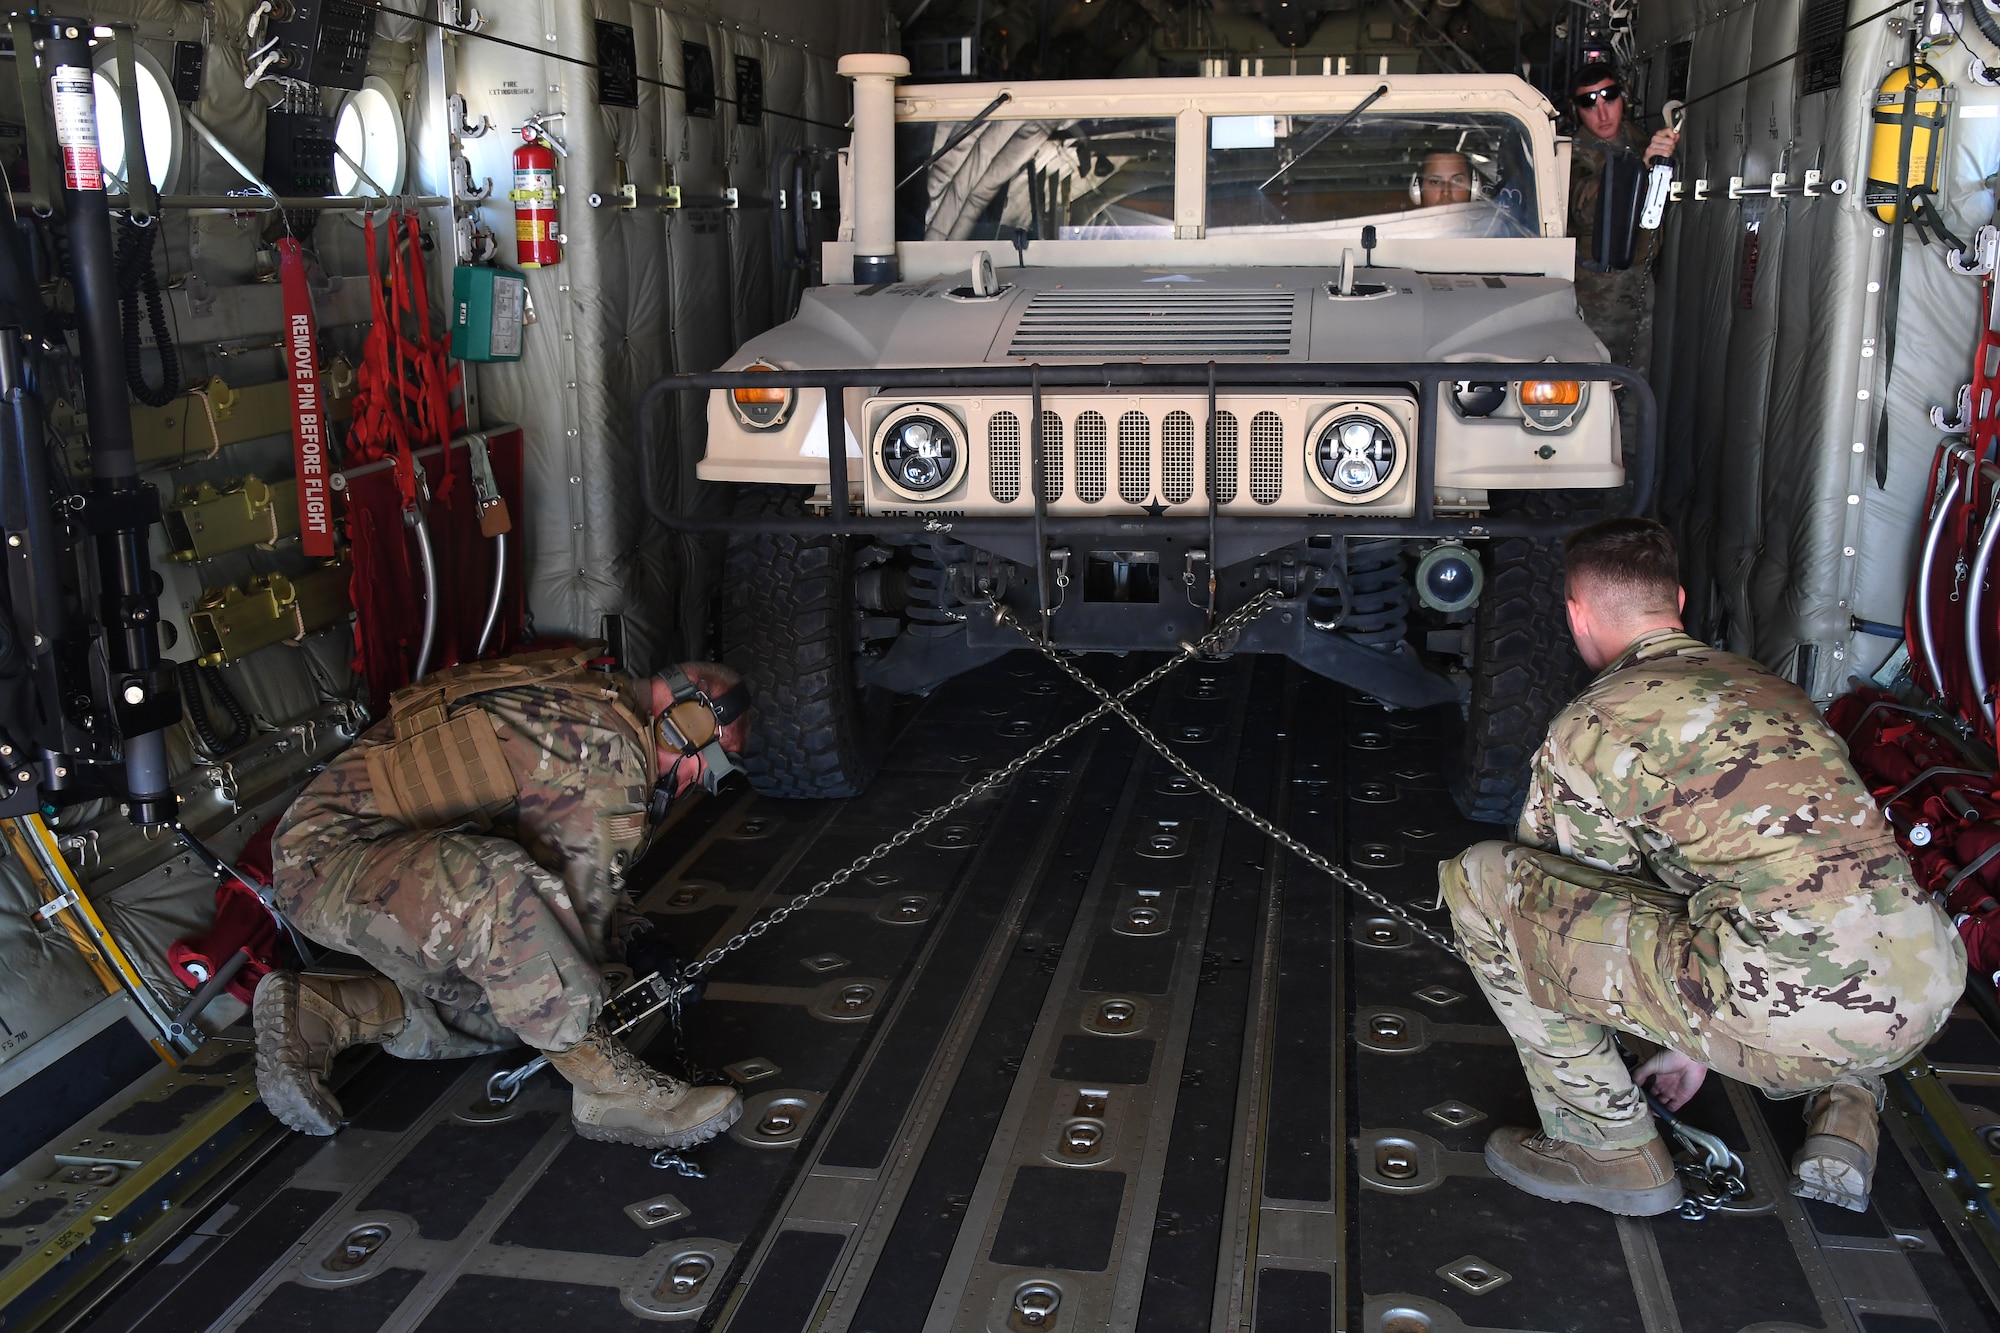 U.S. Air Force Airmen secure a Humvee onto a C-130 Hercules aircraft at the Geronimo Landing Zone during exercise Green Flag Little Rock, Oct. 23, 2019, Fort Polk, Louisiana. During the exercise the team loaded and downloaded tactical vehicles, airdrop bundles, along with a variety of other pallets to support the Army. (U.S. Air Force photo by Tech. Sgt. Liliana Moreno)